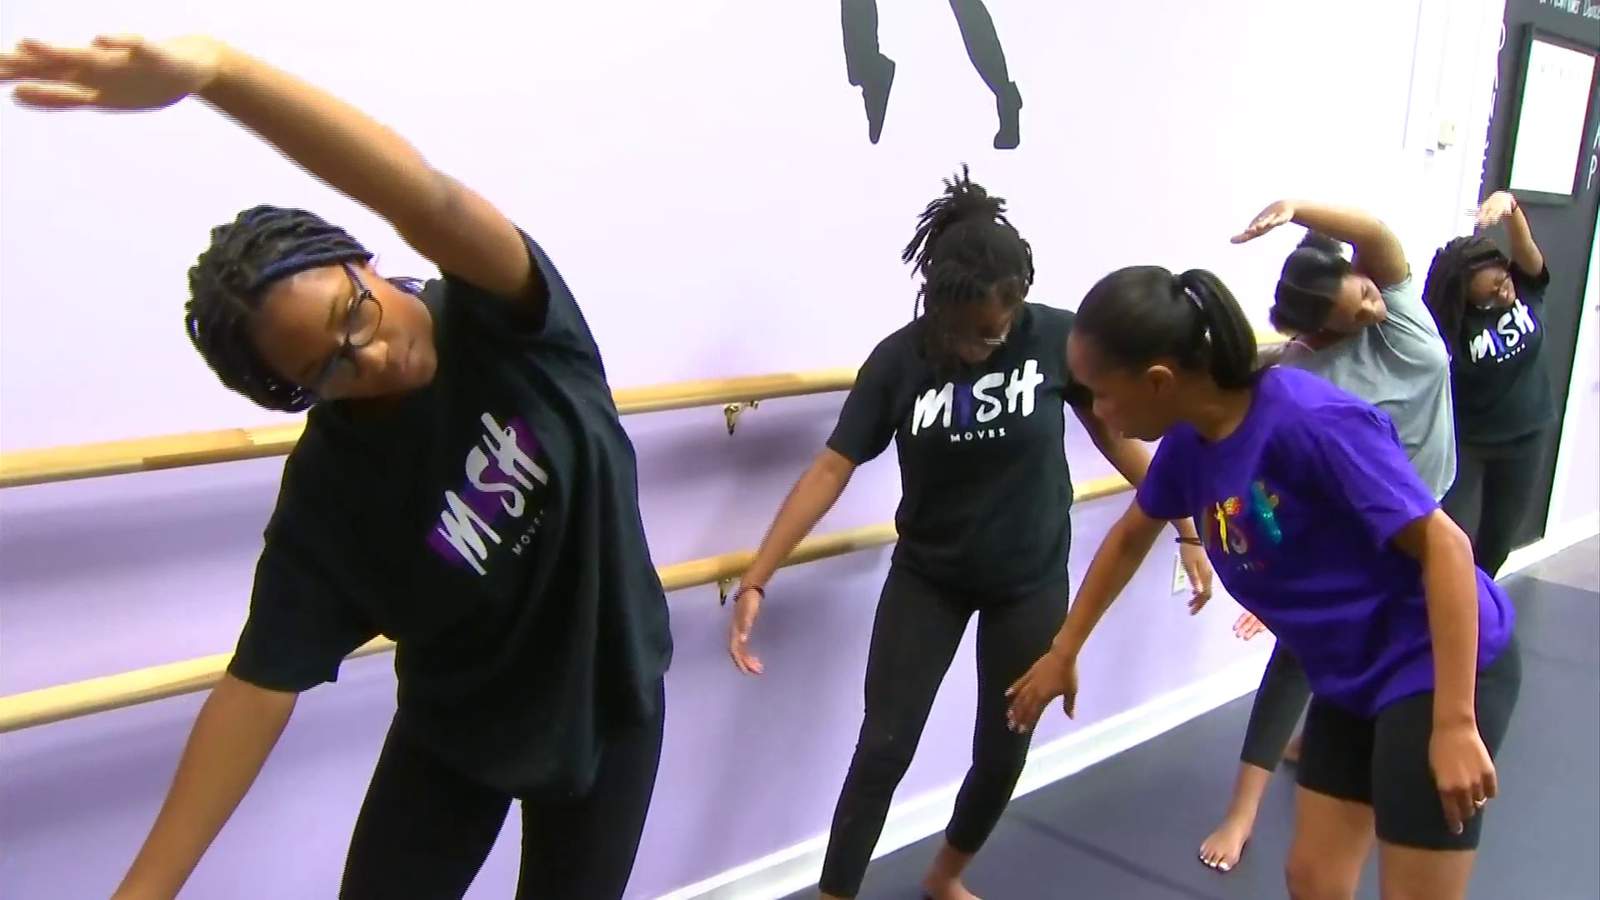 Roanoke nonprofit makes dance lessons affordable so all kids can learn